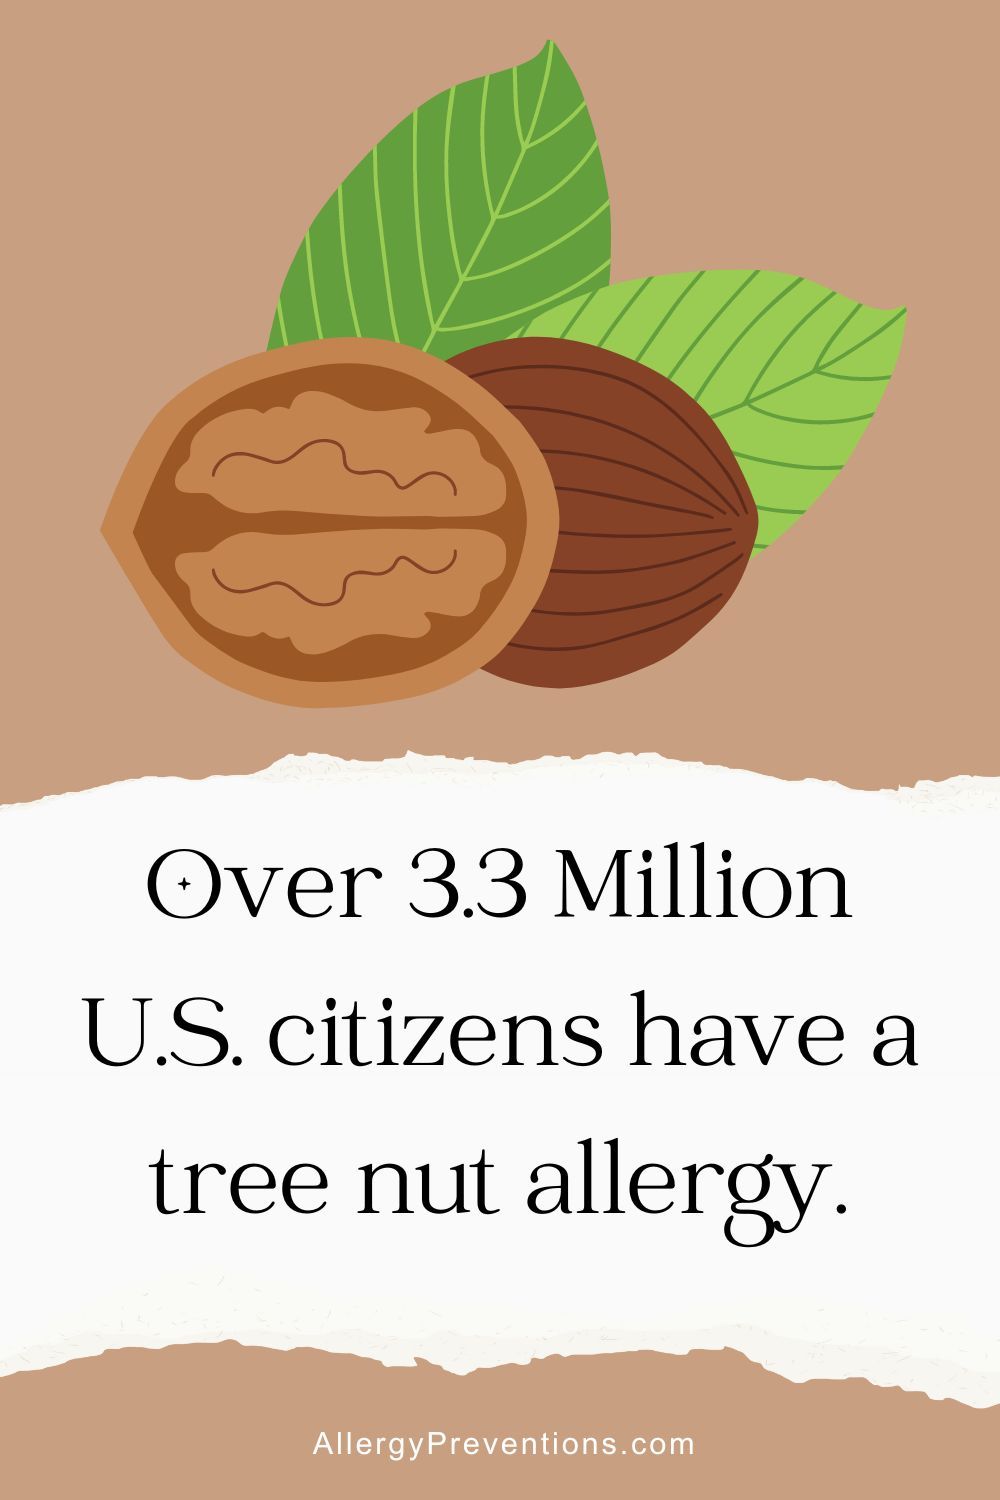 Tree nut allergy fact infographic: Over 3.3 million U.S. citizens have a tree nut allergy.